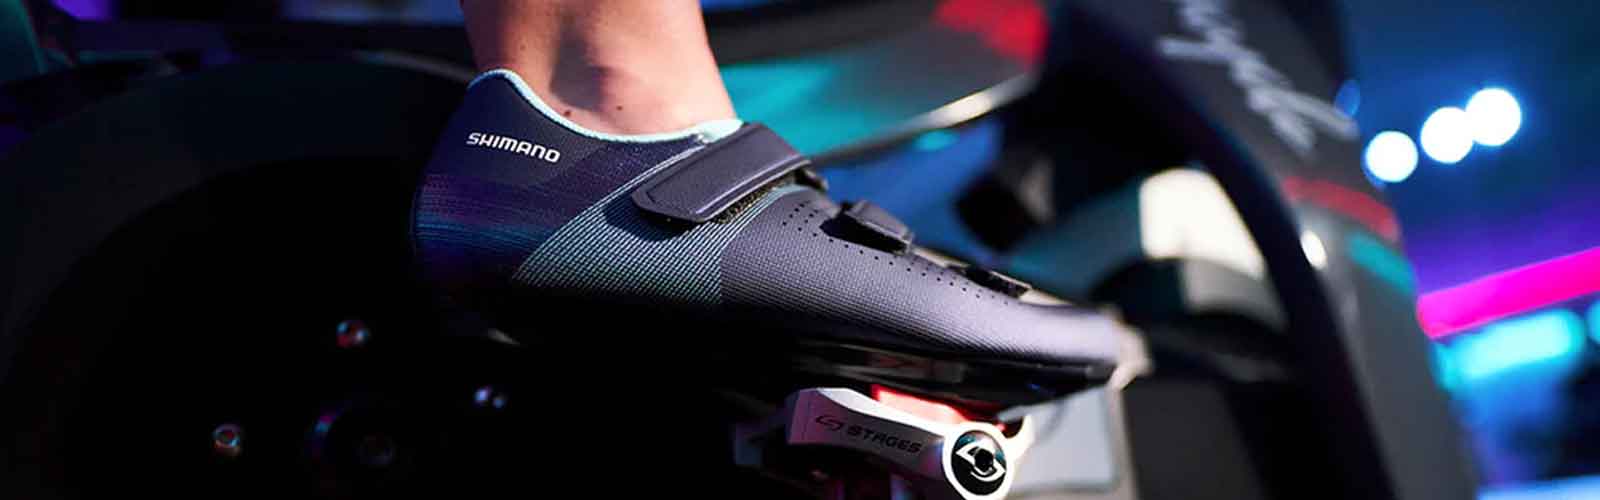 Do Cycling Cleats and Clipping In Make a Difference?